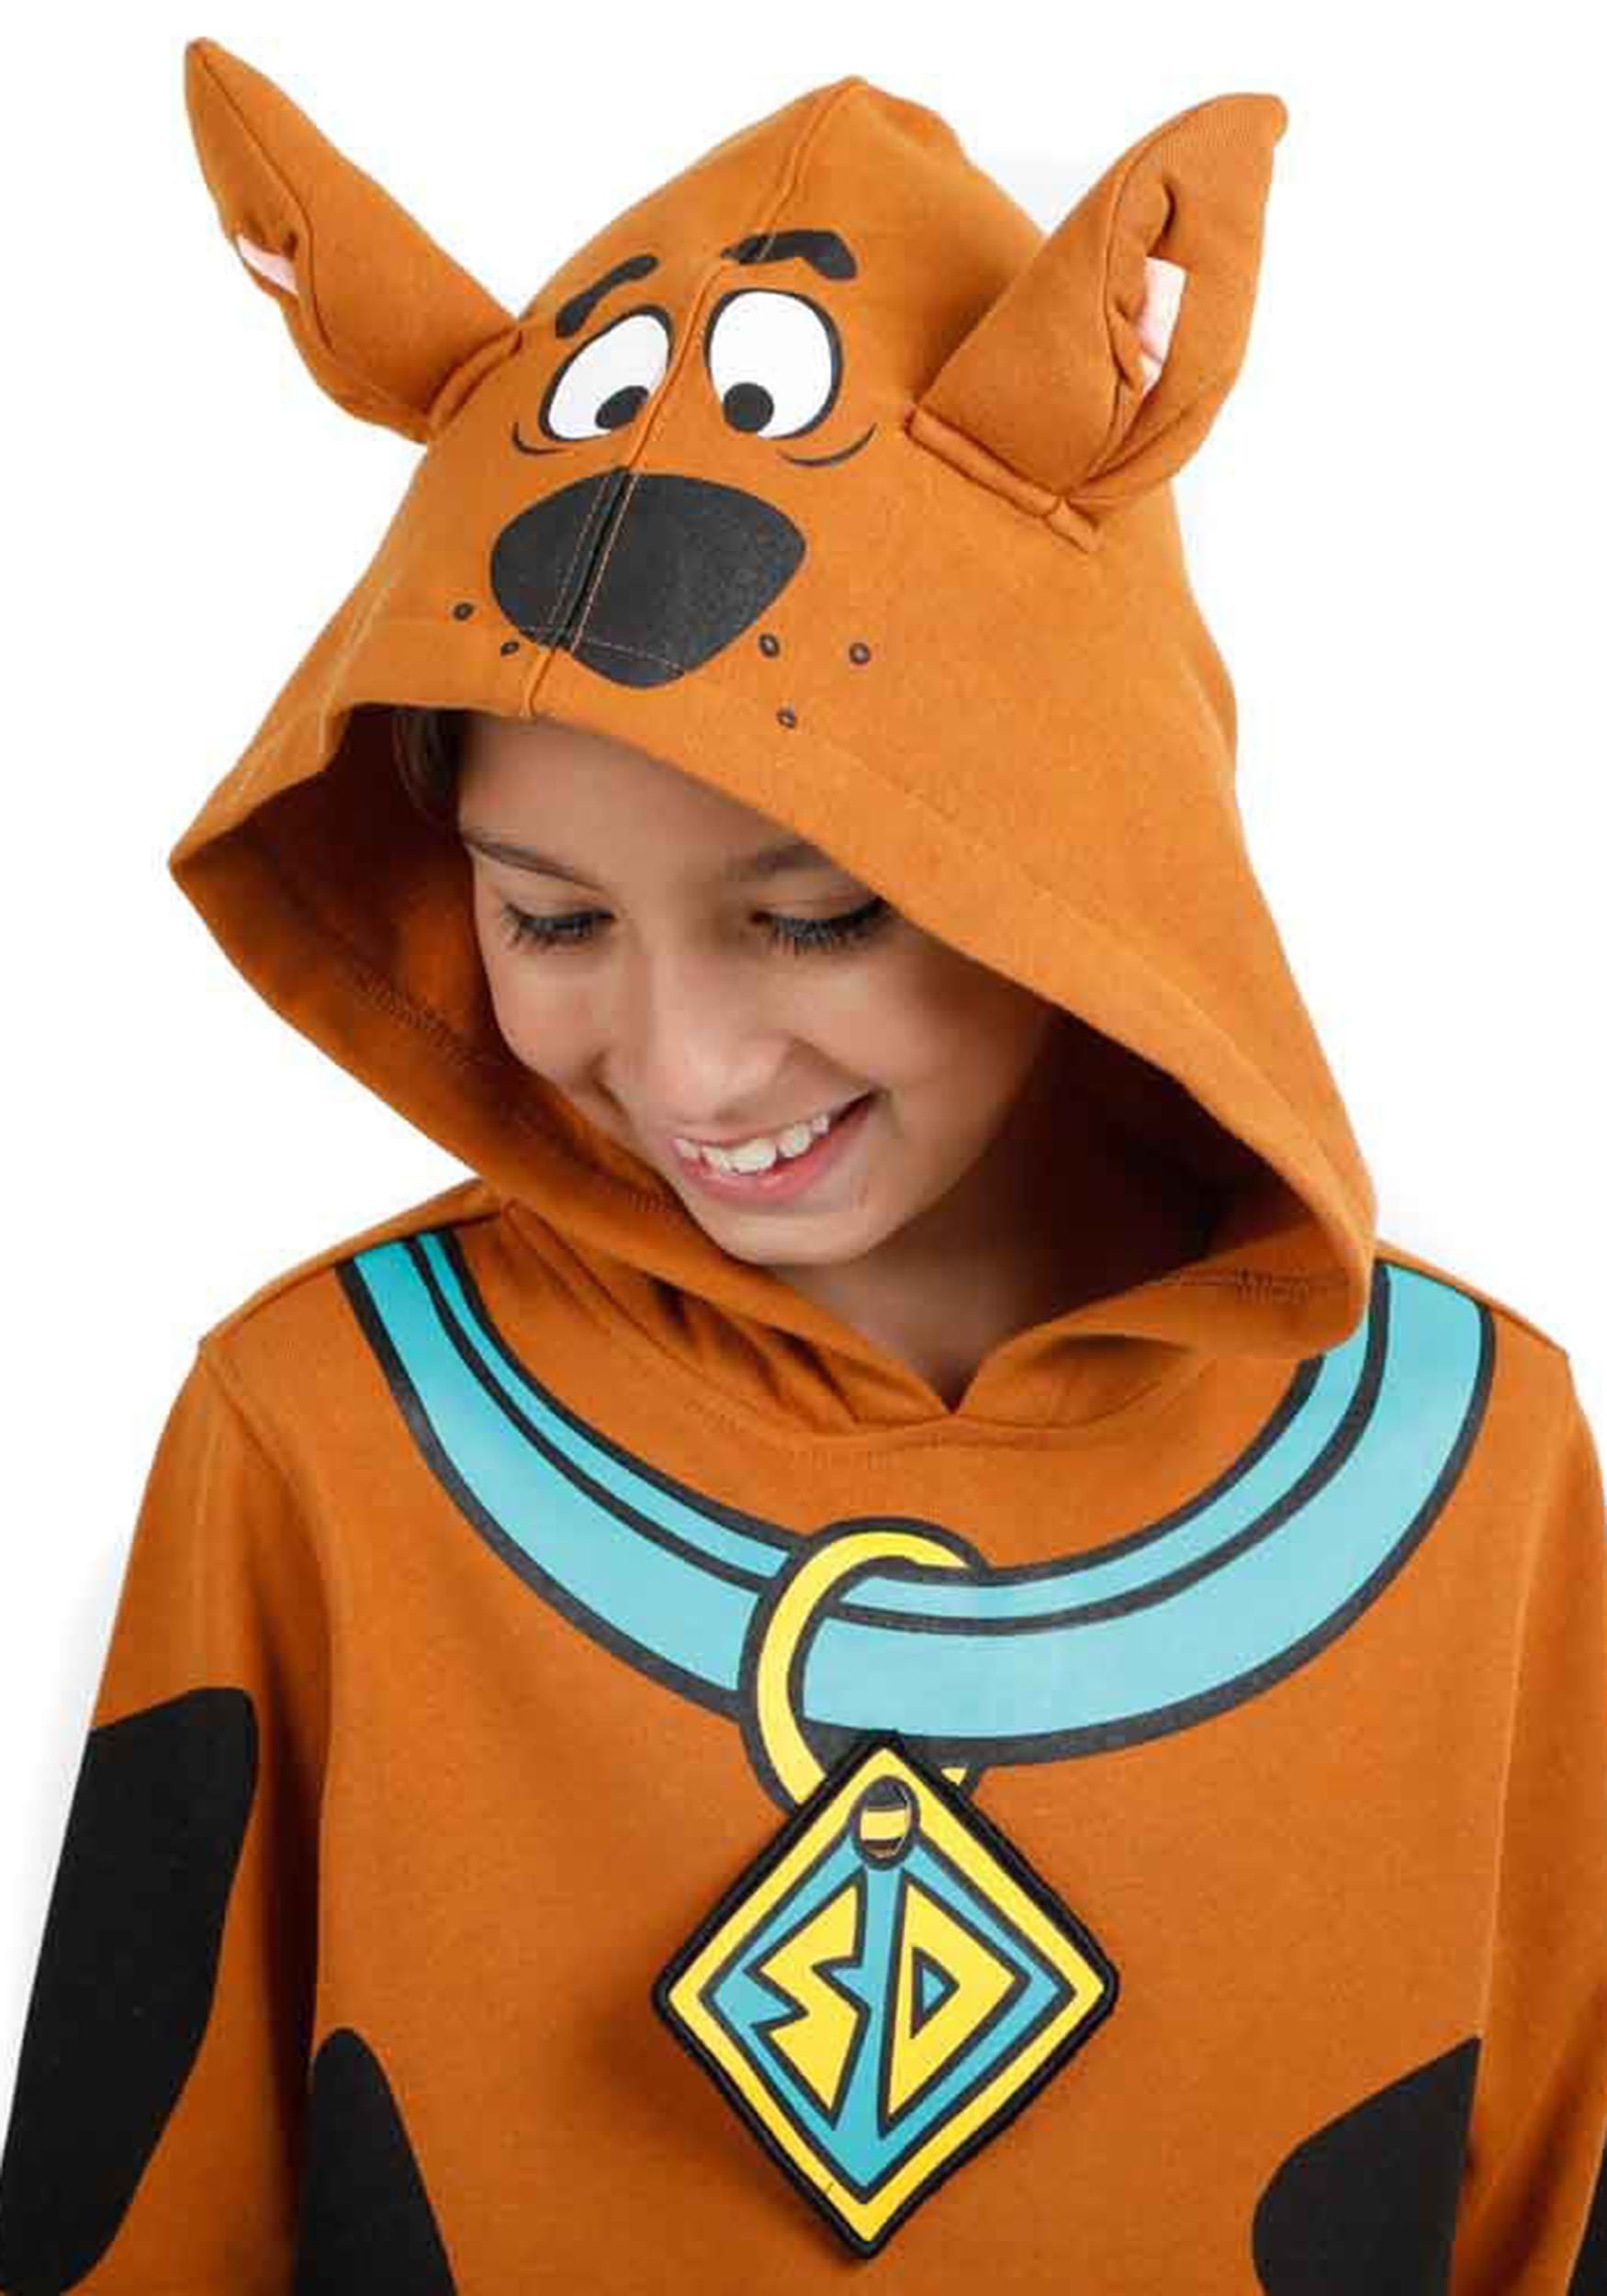 Scooby Doo Cosplay Hoodie for Youths